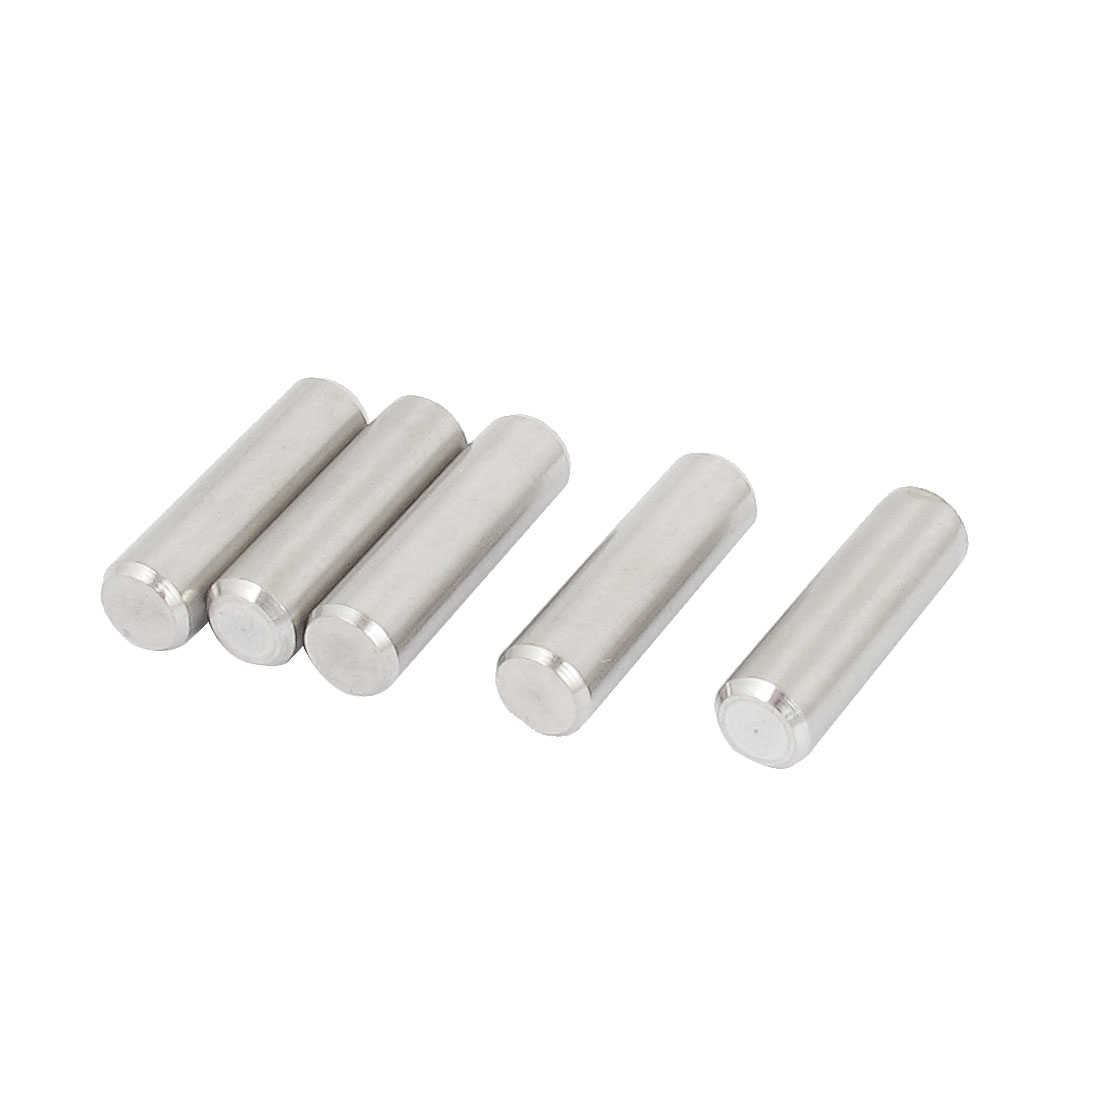 8mm x 28mm 304 Stainless Steel Dowel Pins Fasten Elements Silver Tone 5pcs